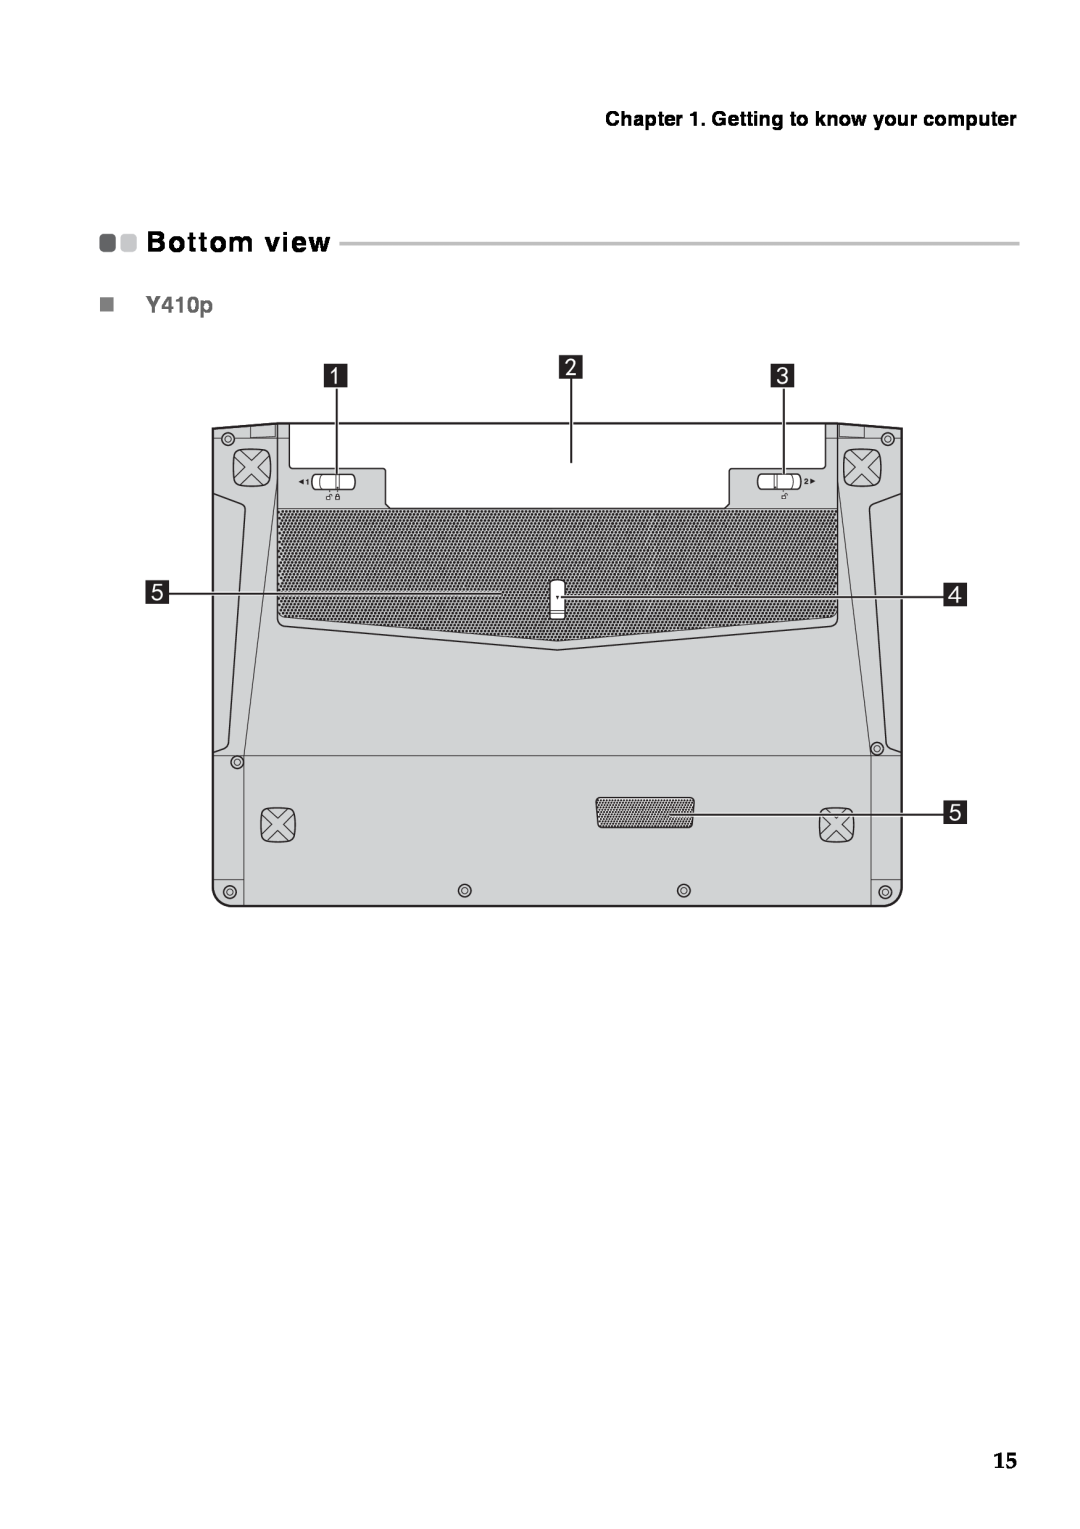 Lenovo 59376431, 59375627, 59375625 manual  Y410p, Getting to know your computer, Bottom view 